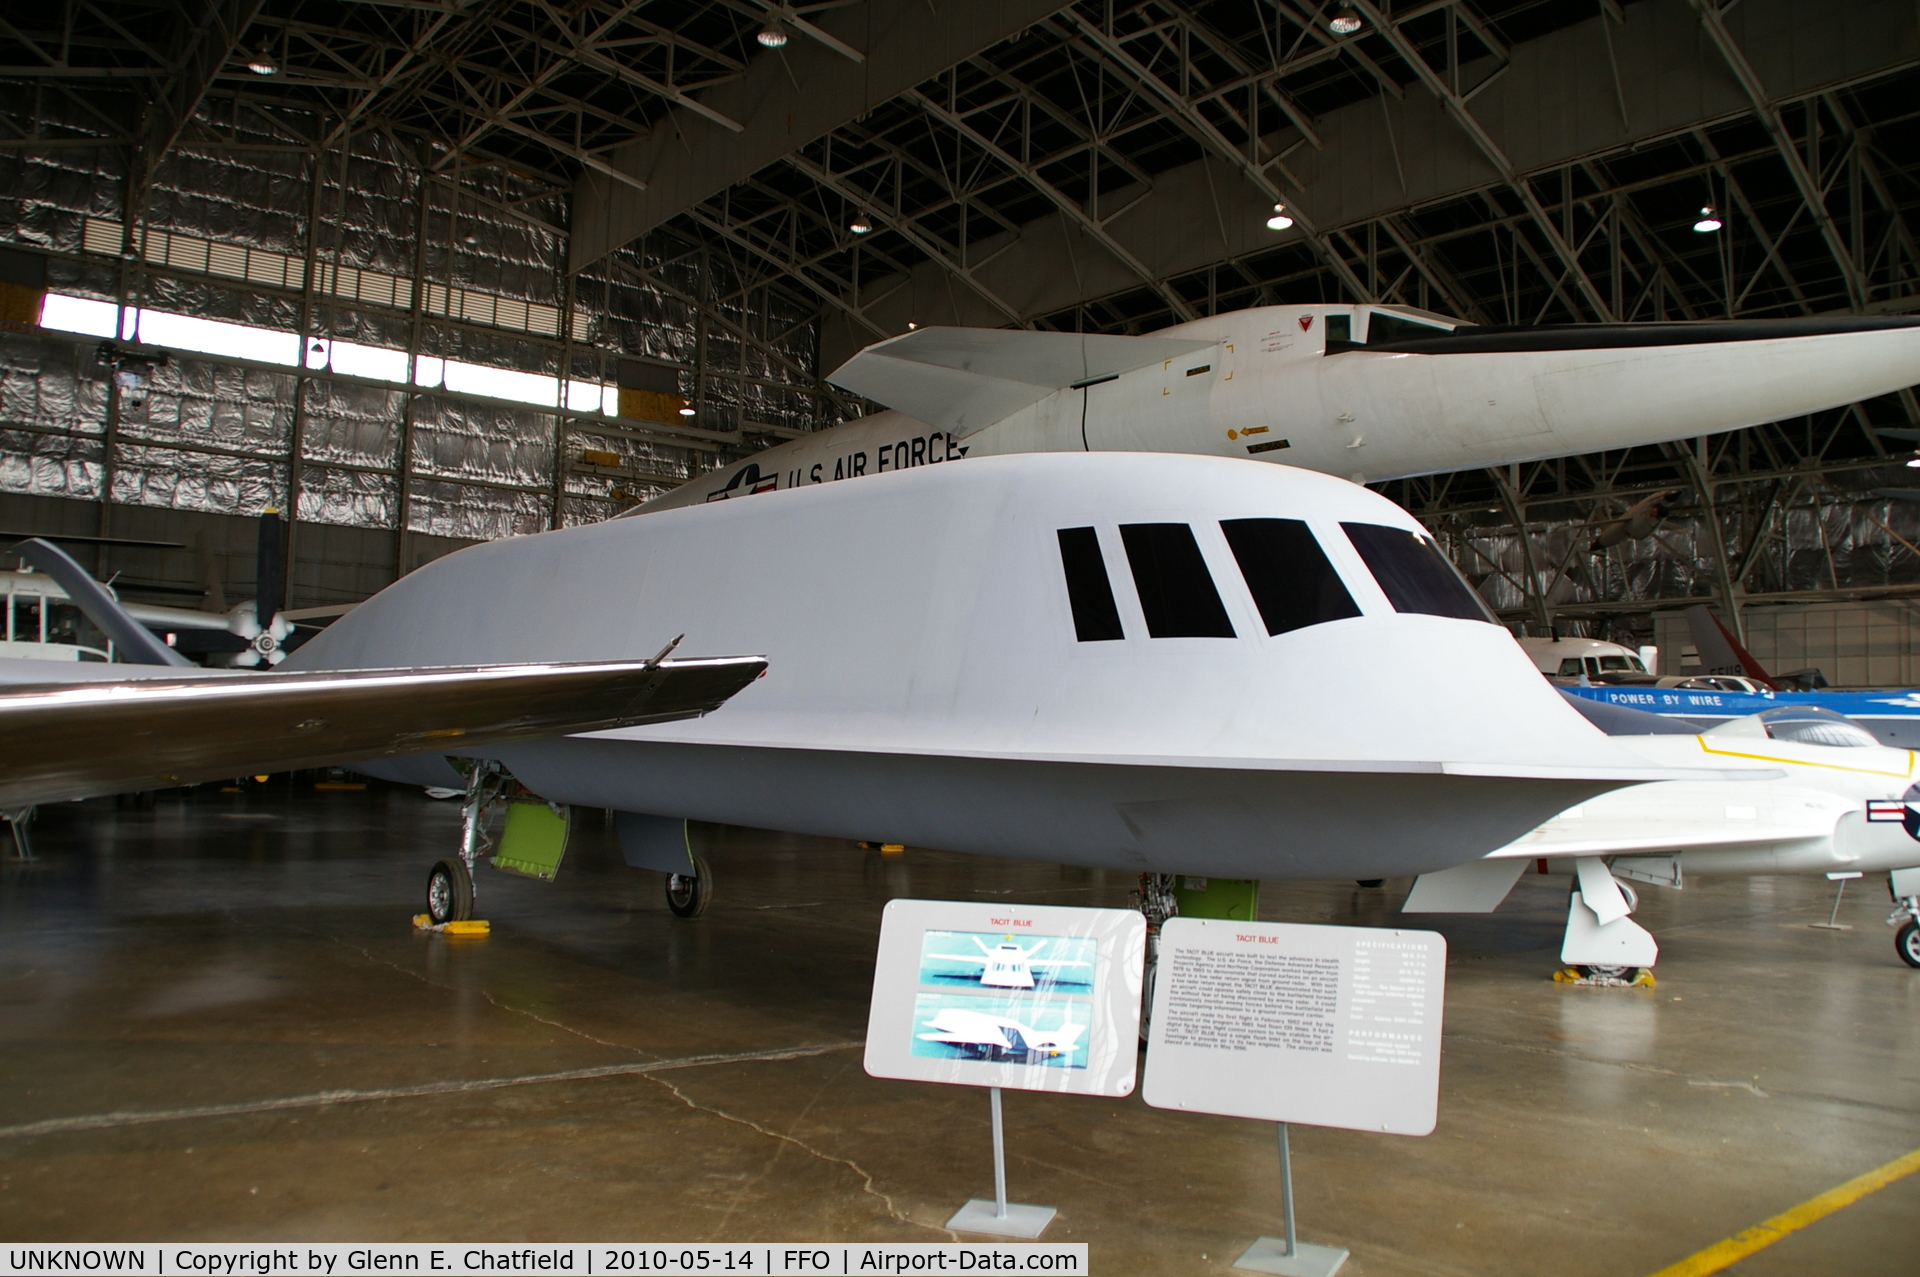 UNKNOWN, 1981 Northrop YF-117D Tacit Blue C/N Not found, Tacit Blue at the National Museum of the USAF